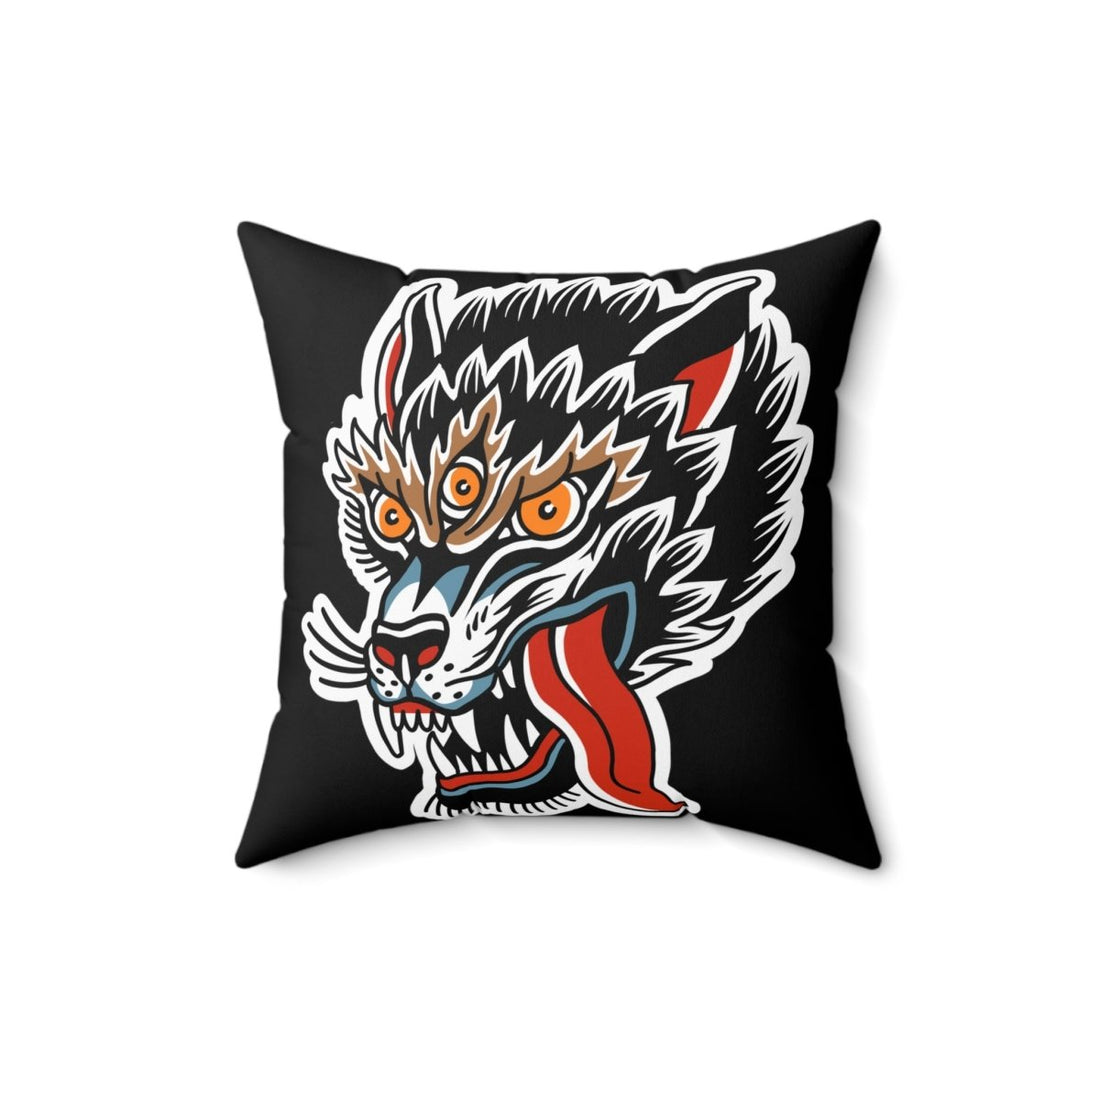 Wolf Tattoo Inspired Square Pillow Cover